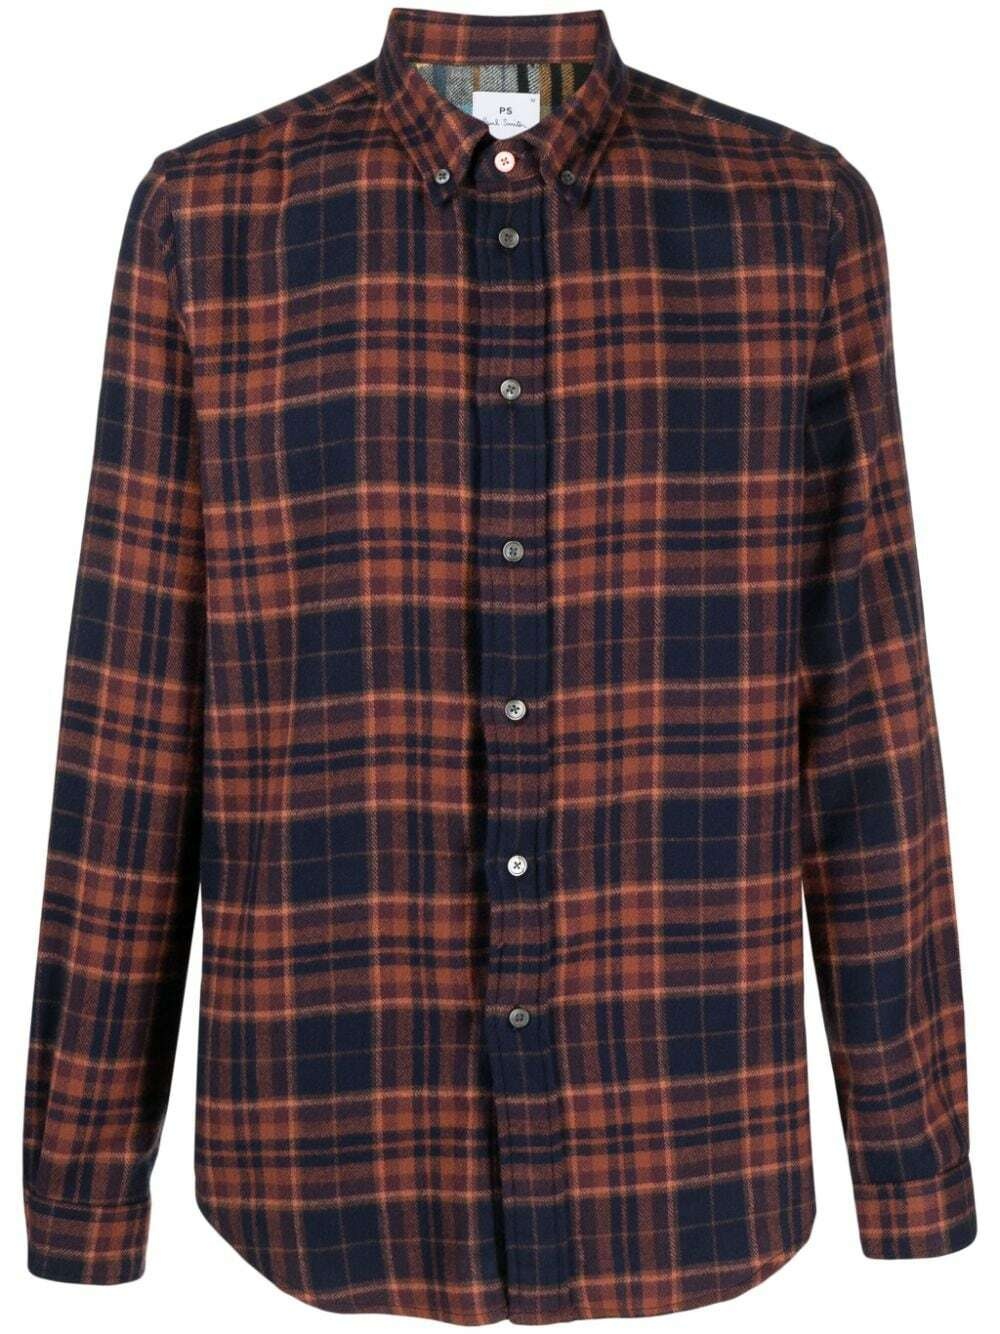 PS PAUL SMITH - Checked Shirt PS by Paul Smith